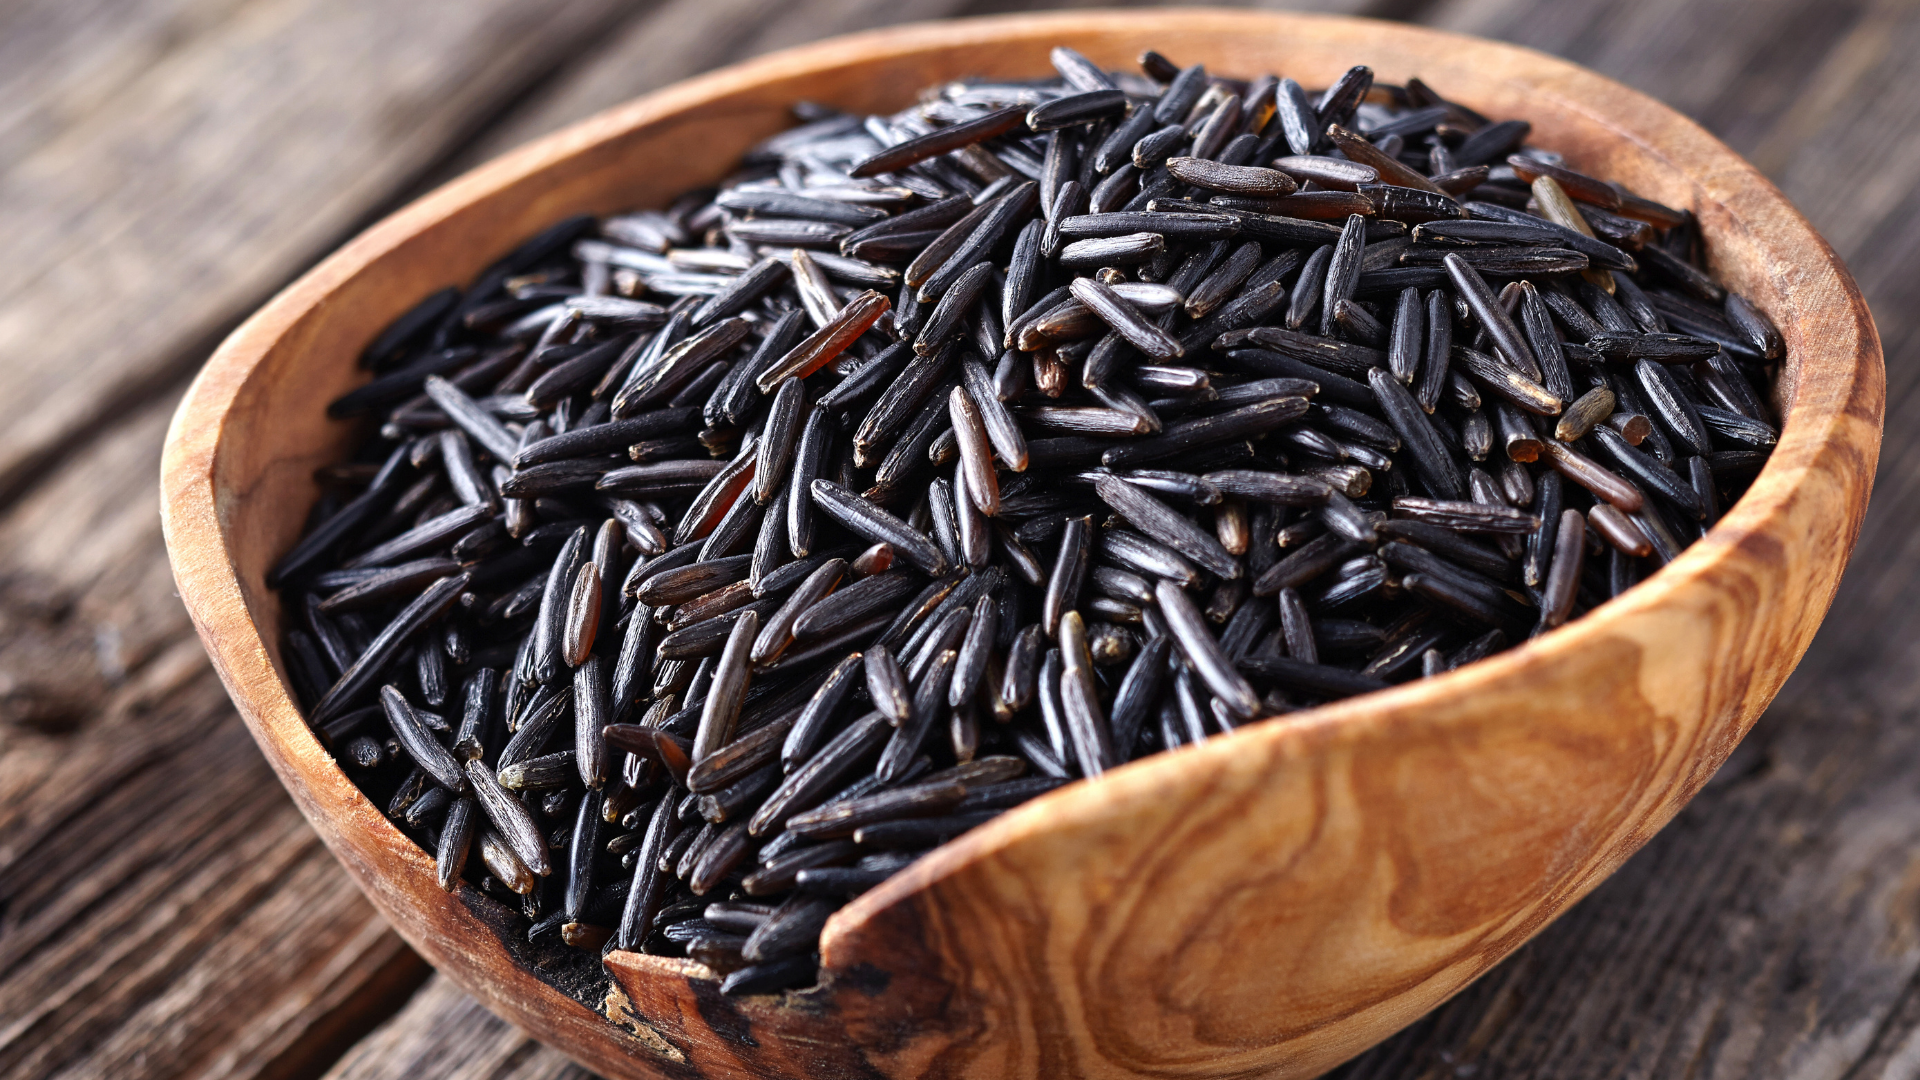 Dr. Emily Onello Studies Possible Health Benefits of Manoomin–Wild Rice